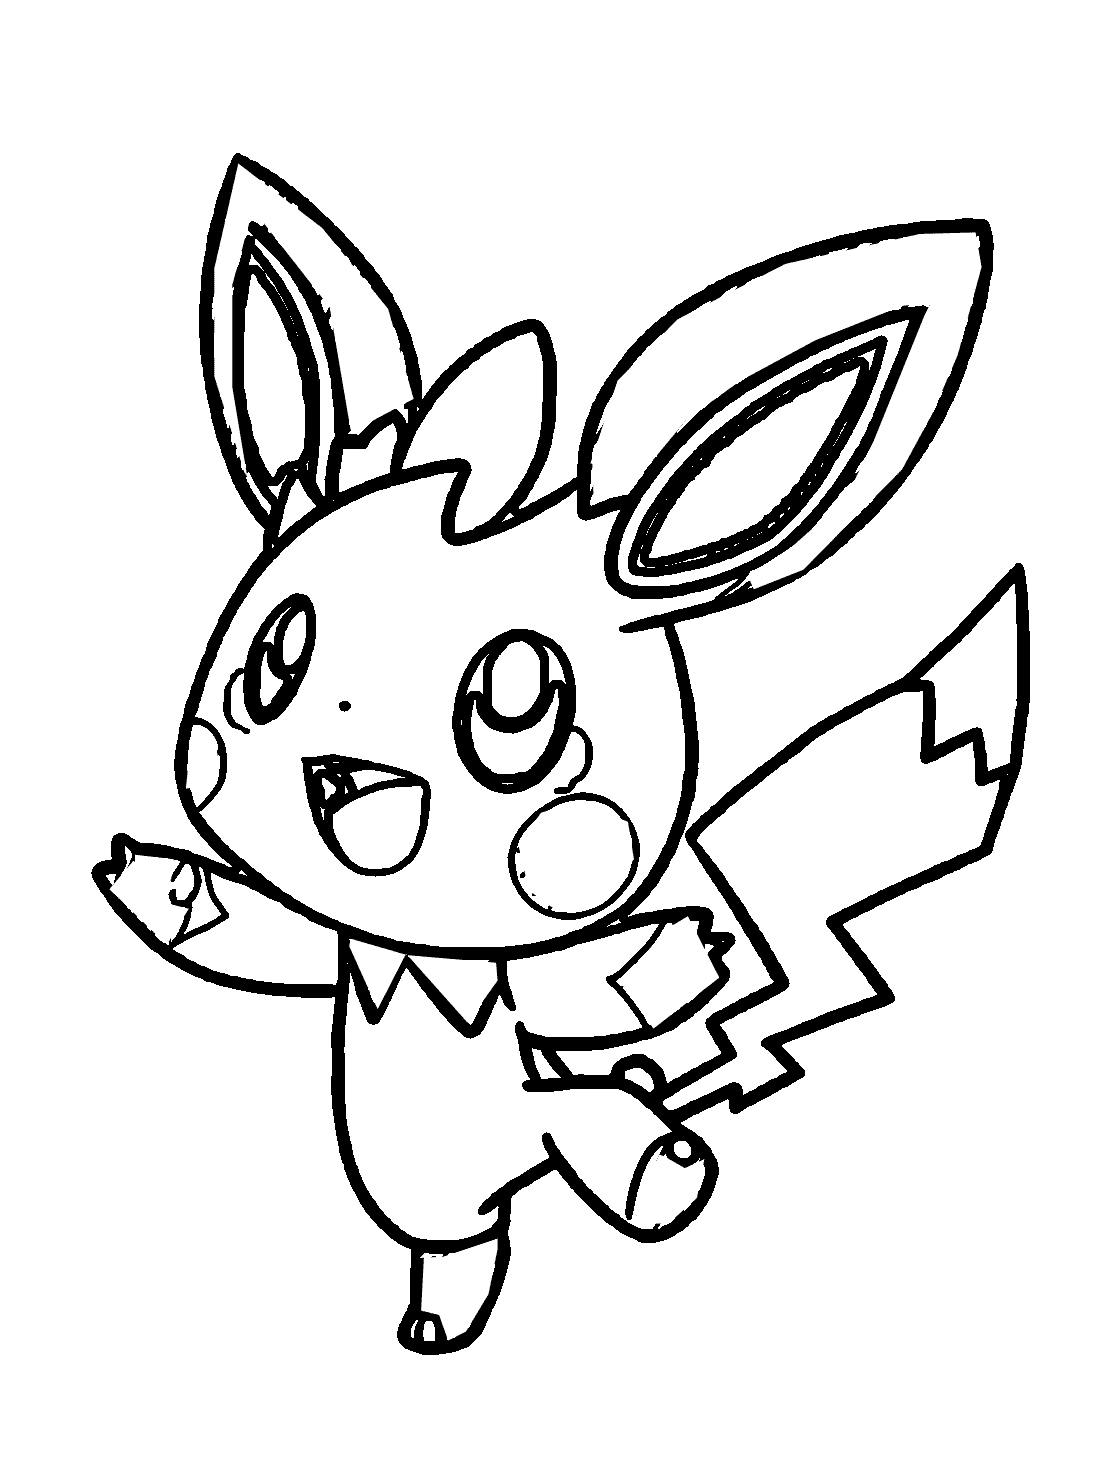 Pokemon coloring pages online for kids